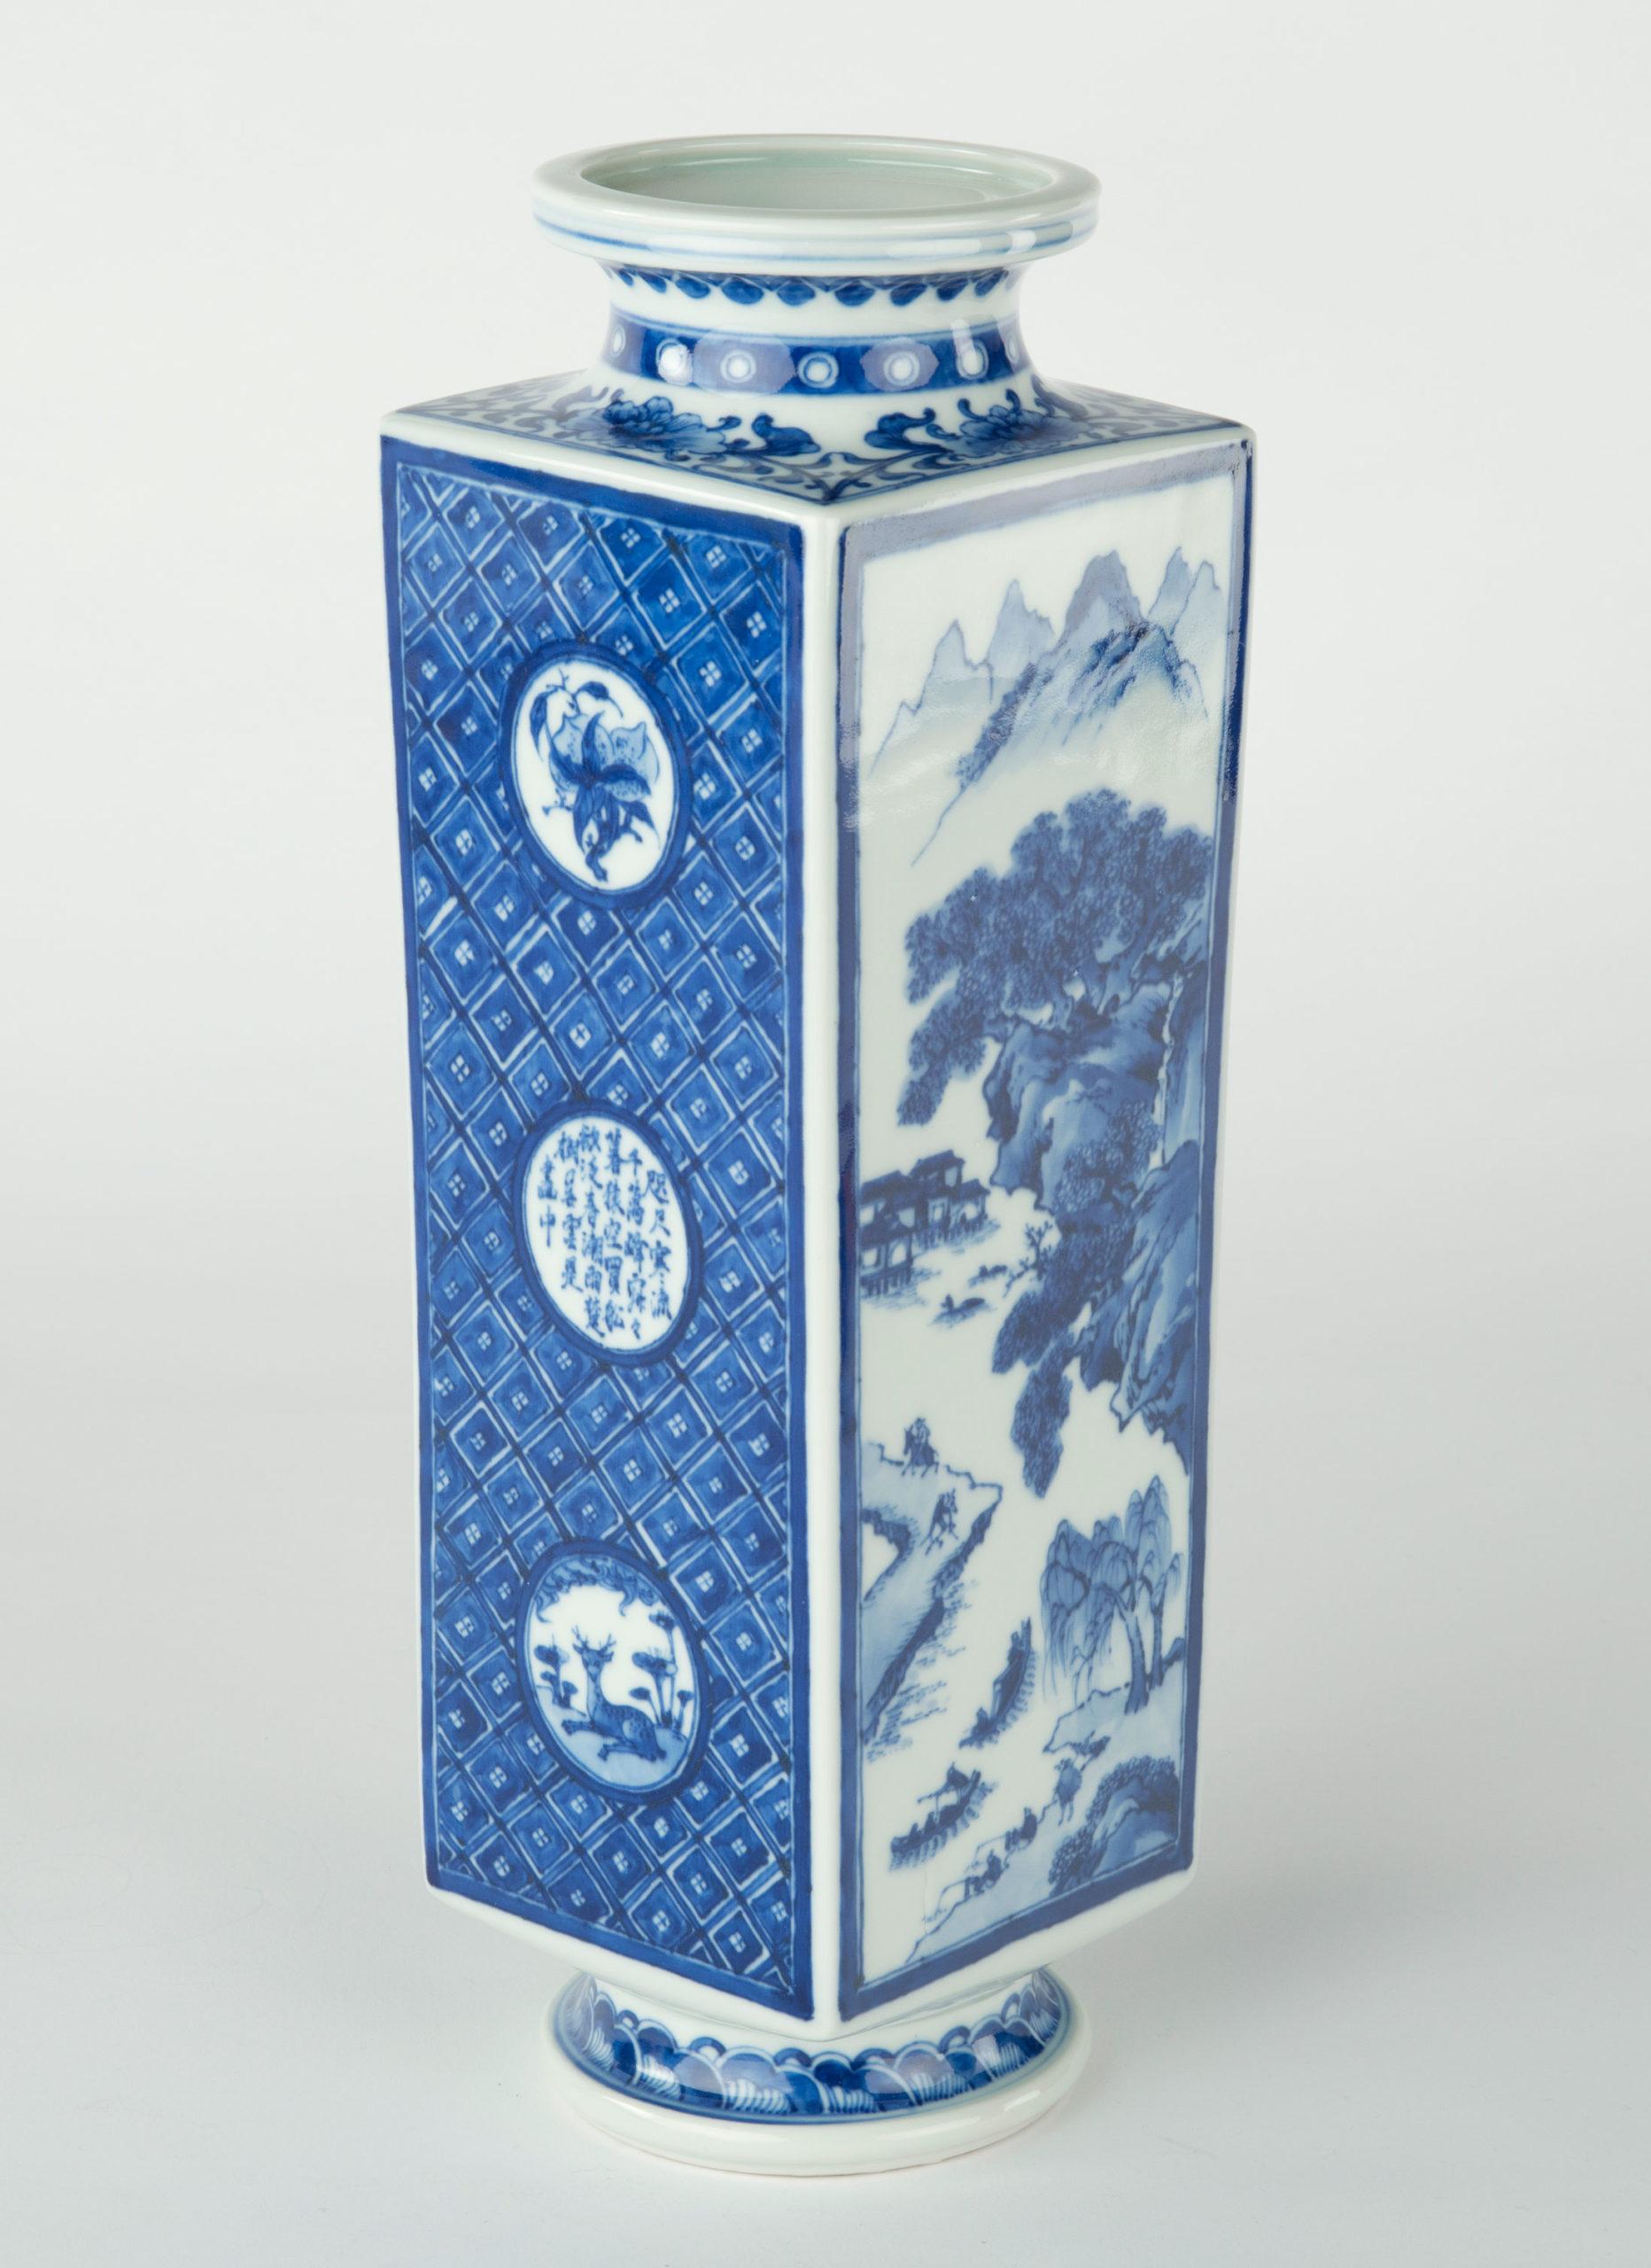 As part of our Japanese works of art collection we are delighted to offer this tapering square form Meiji Period 1868-1912, ceramic vase from the studios of the highly coveted Imperial artist Miyagawa Makuzu Kozan 1842-1916 , on this occasion Kozan